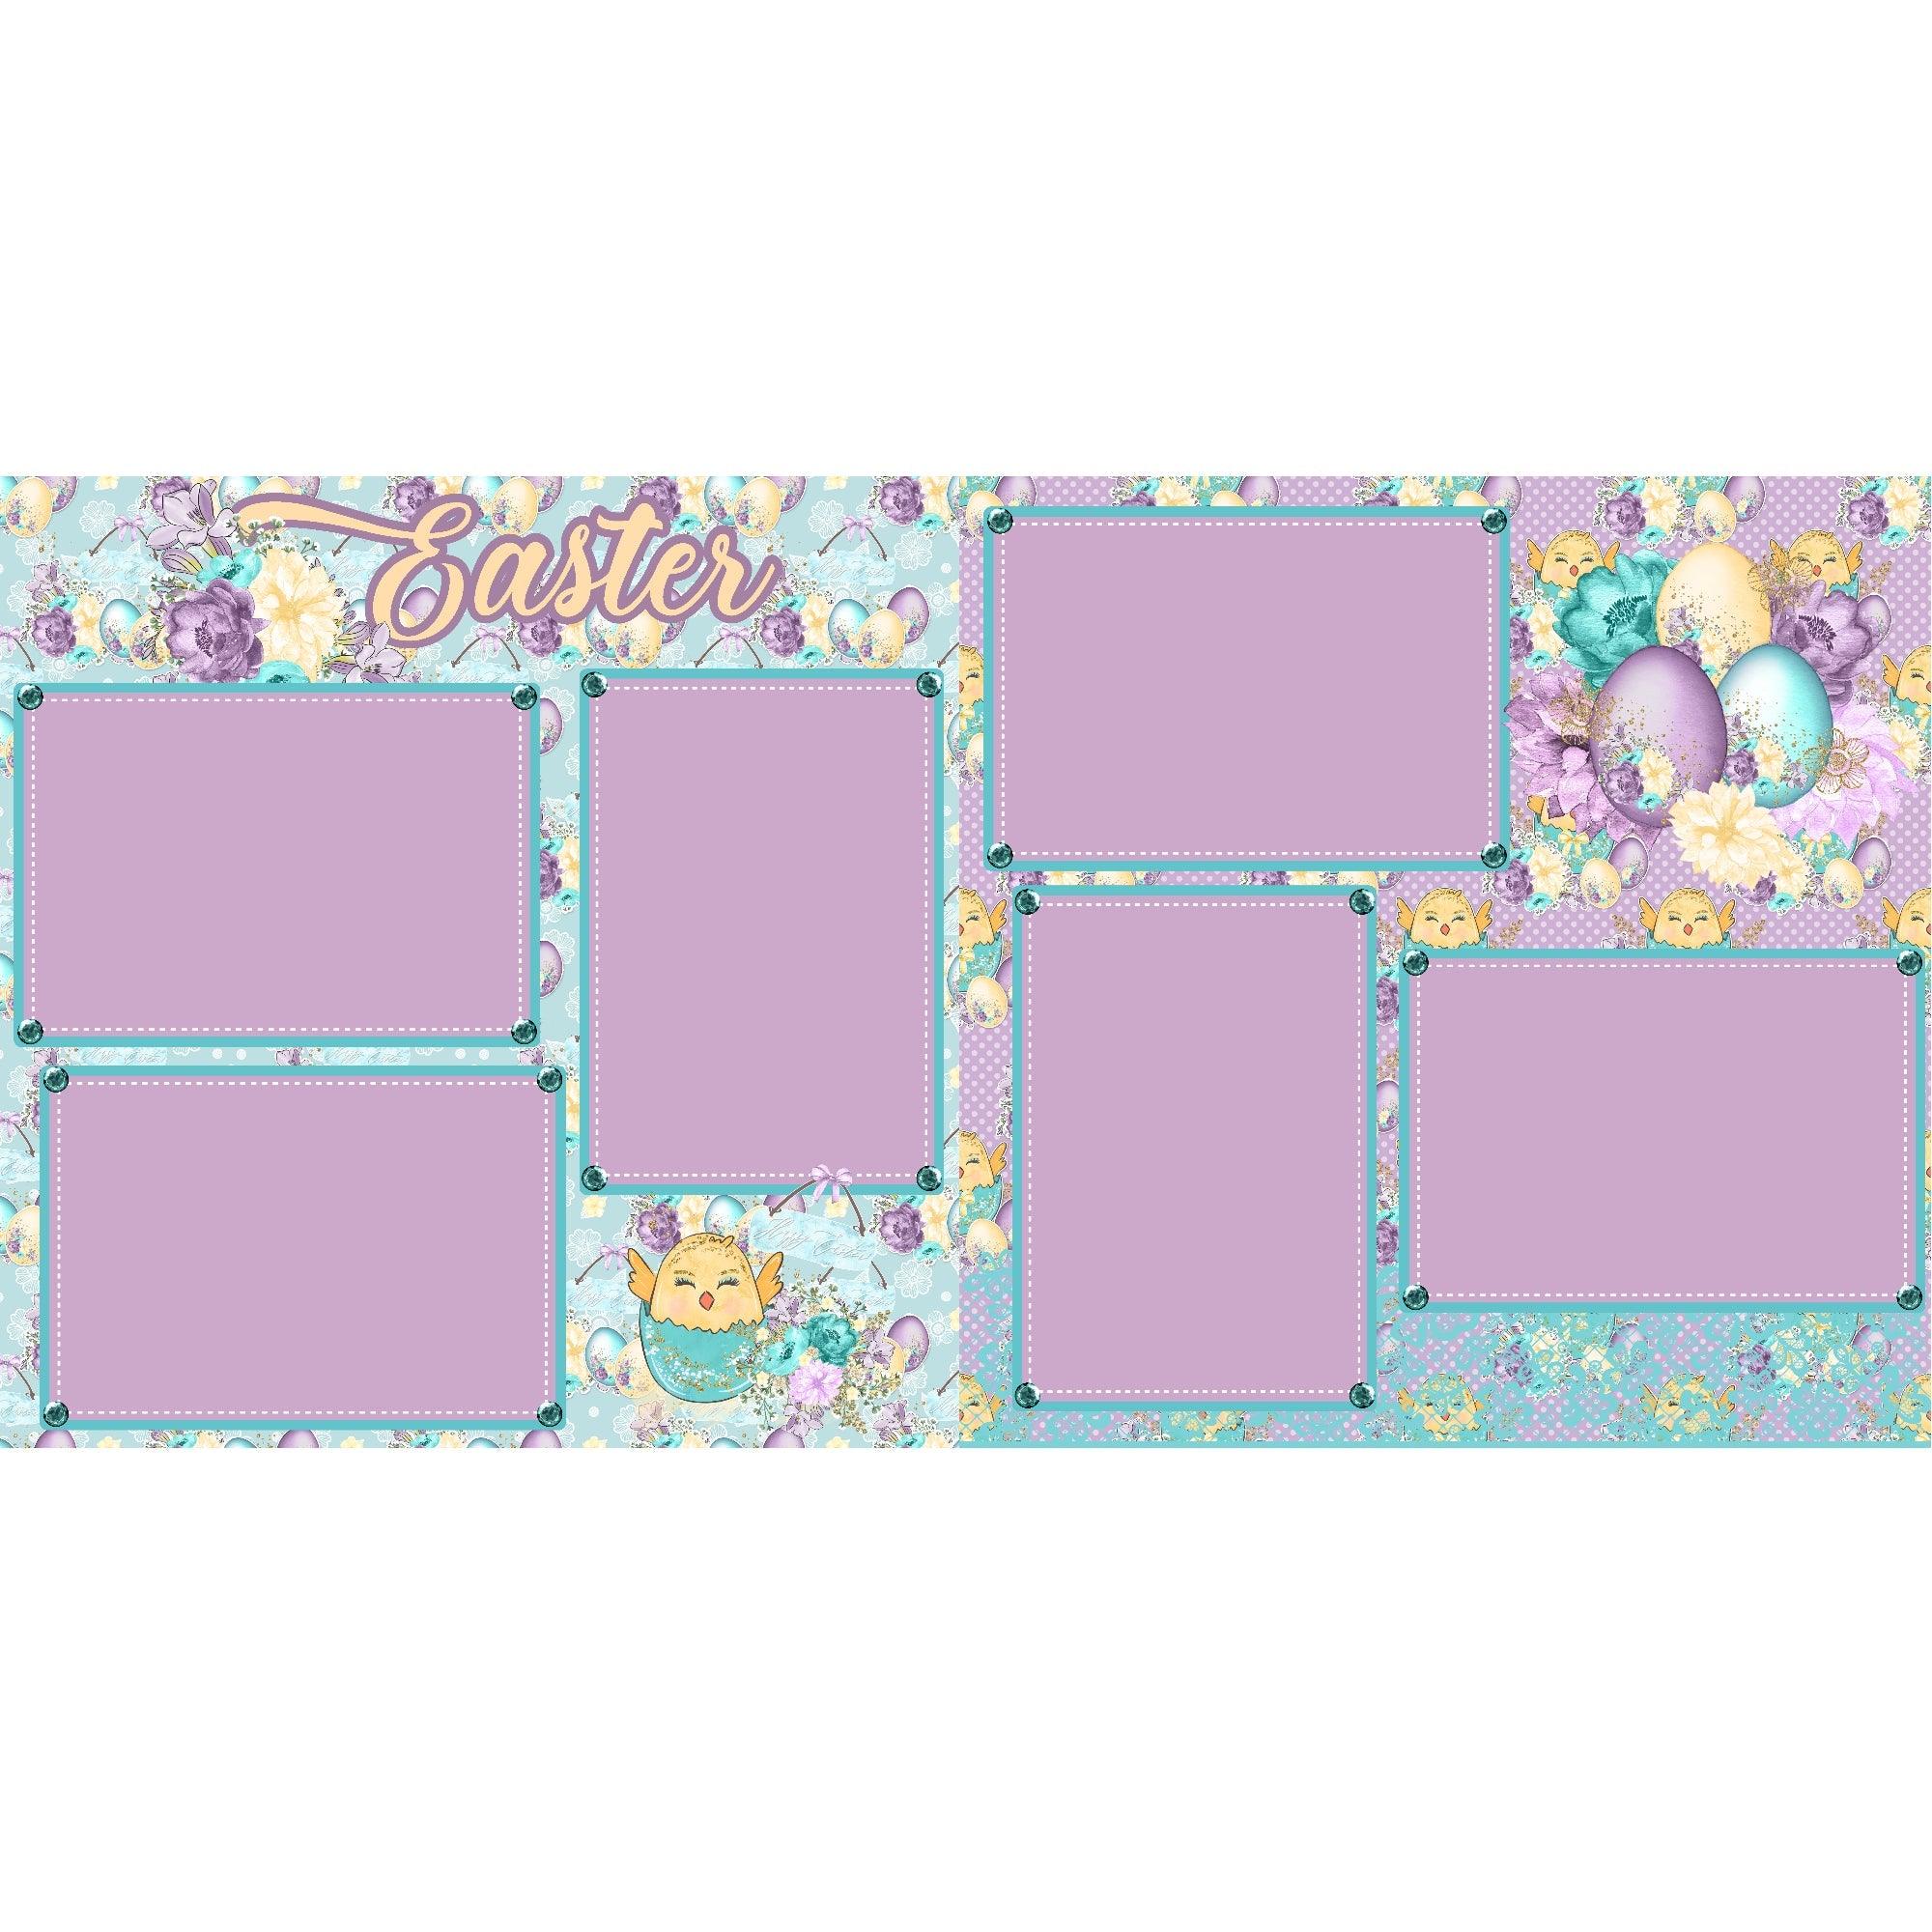 Elegant Easter (2) - 12 x 12 Premade, Printed Scrapbook Pages by SSC Designs